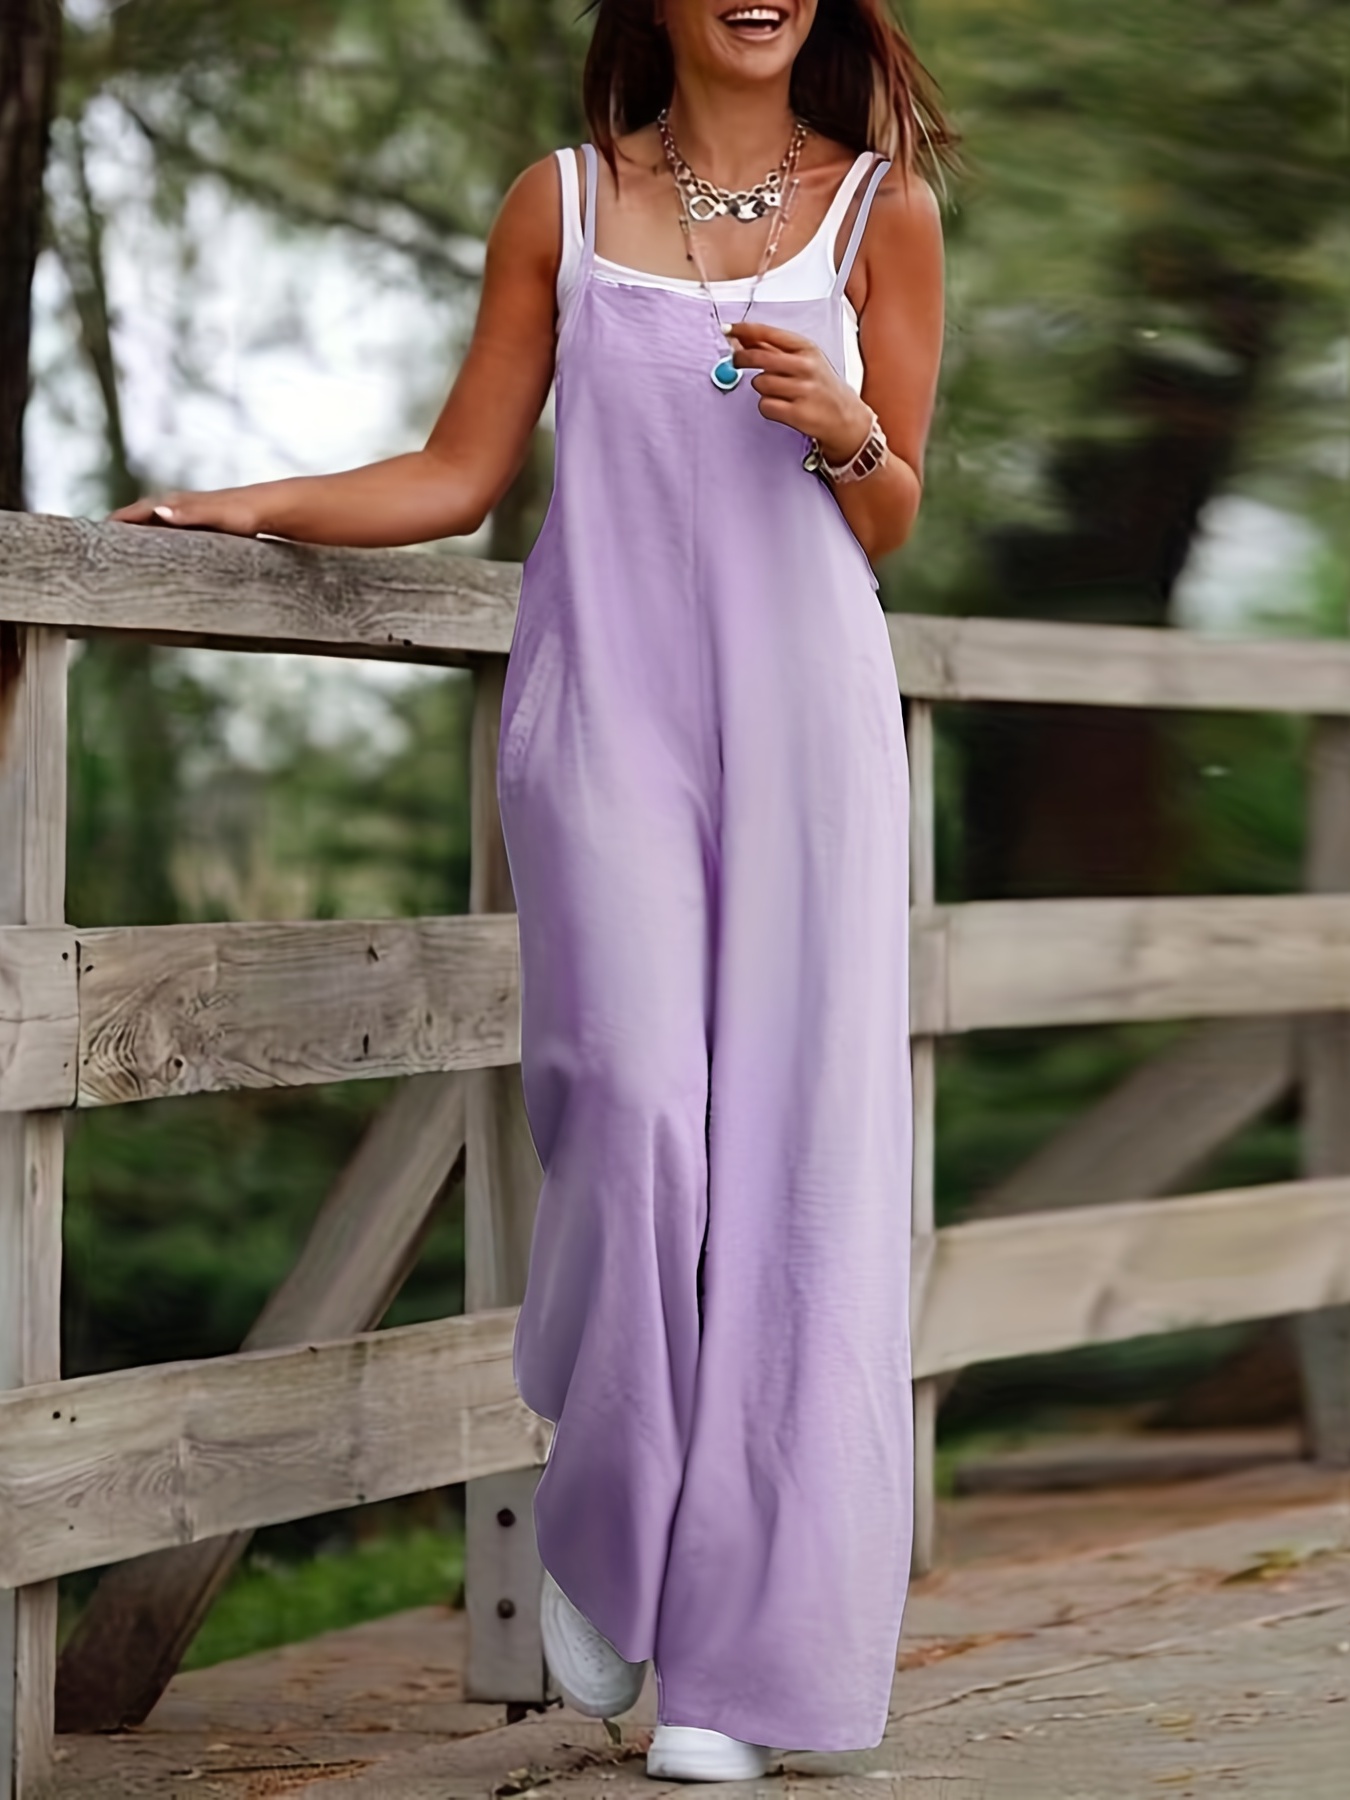 Aueoeo Petite Jumpsuits For Women, Women's Summer Casual, 40% OFF